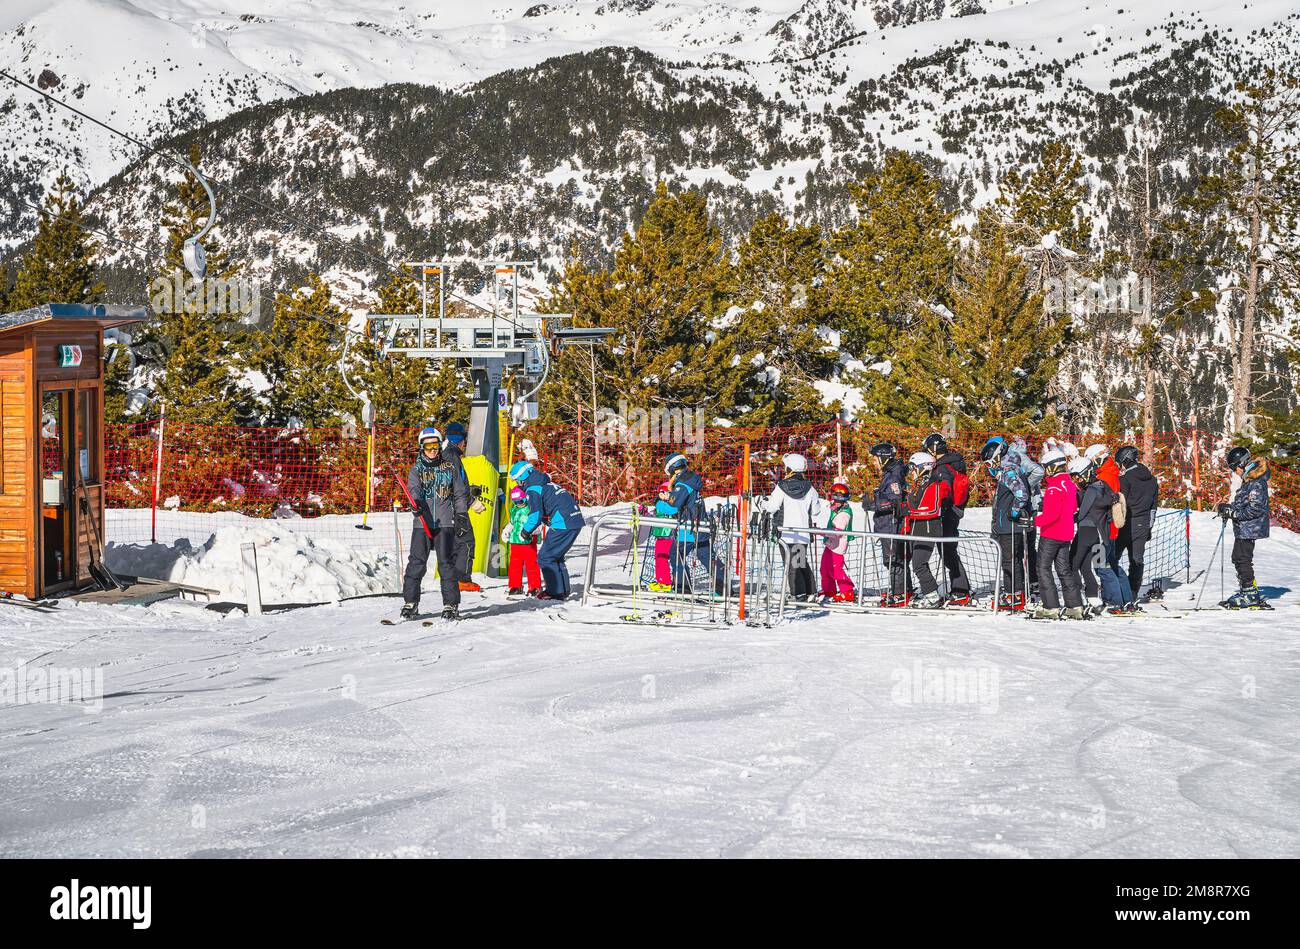 El Tarter, Andorra, Jan 2020 Ski instructor teaching a group of young kids how to ski and get on ski drag lift. Winter holidays in Pyrenees Mountains Stock Photo